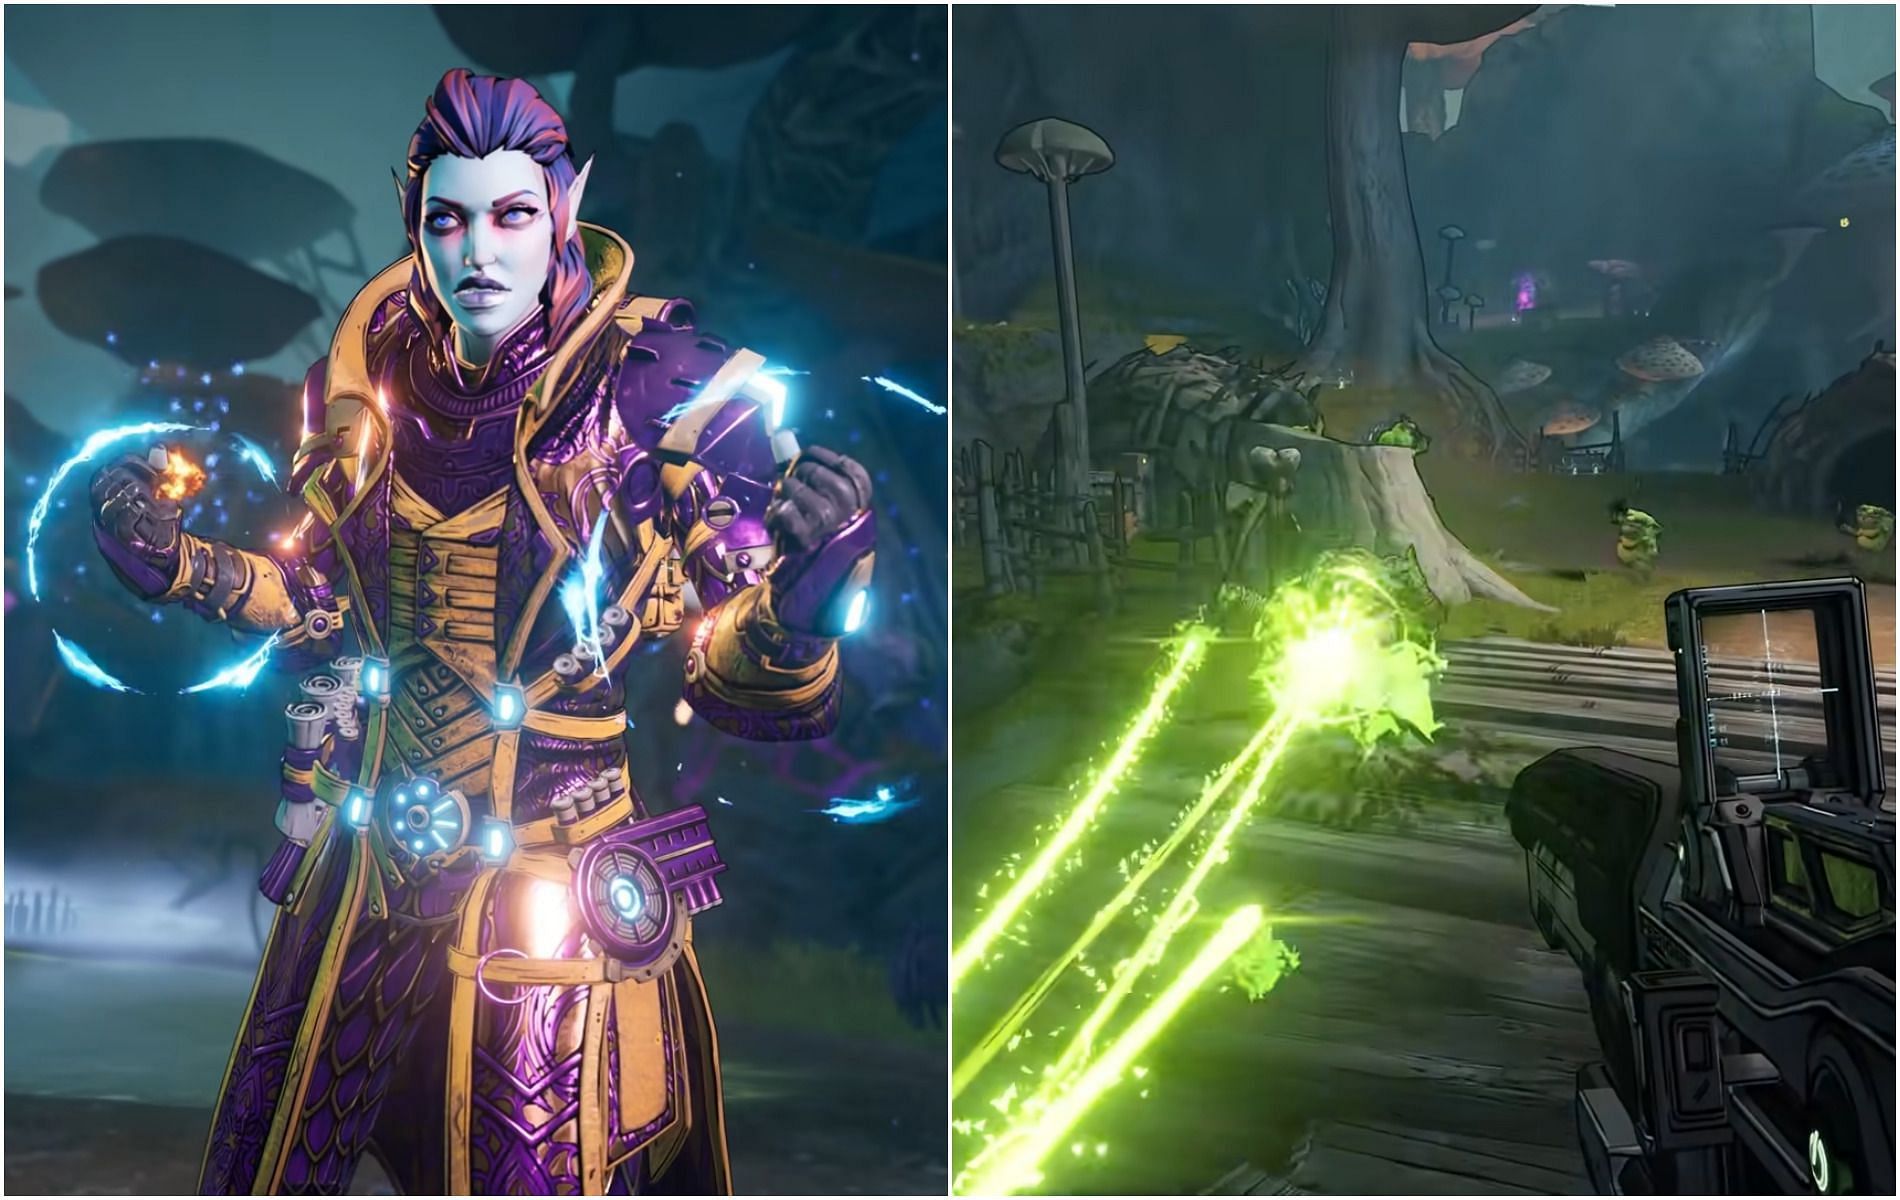 These wizards are not to be underestimated (Images via Gearbox Software)